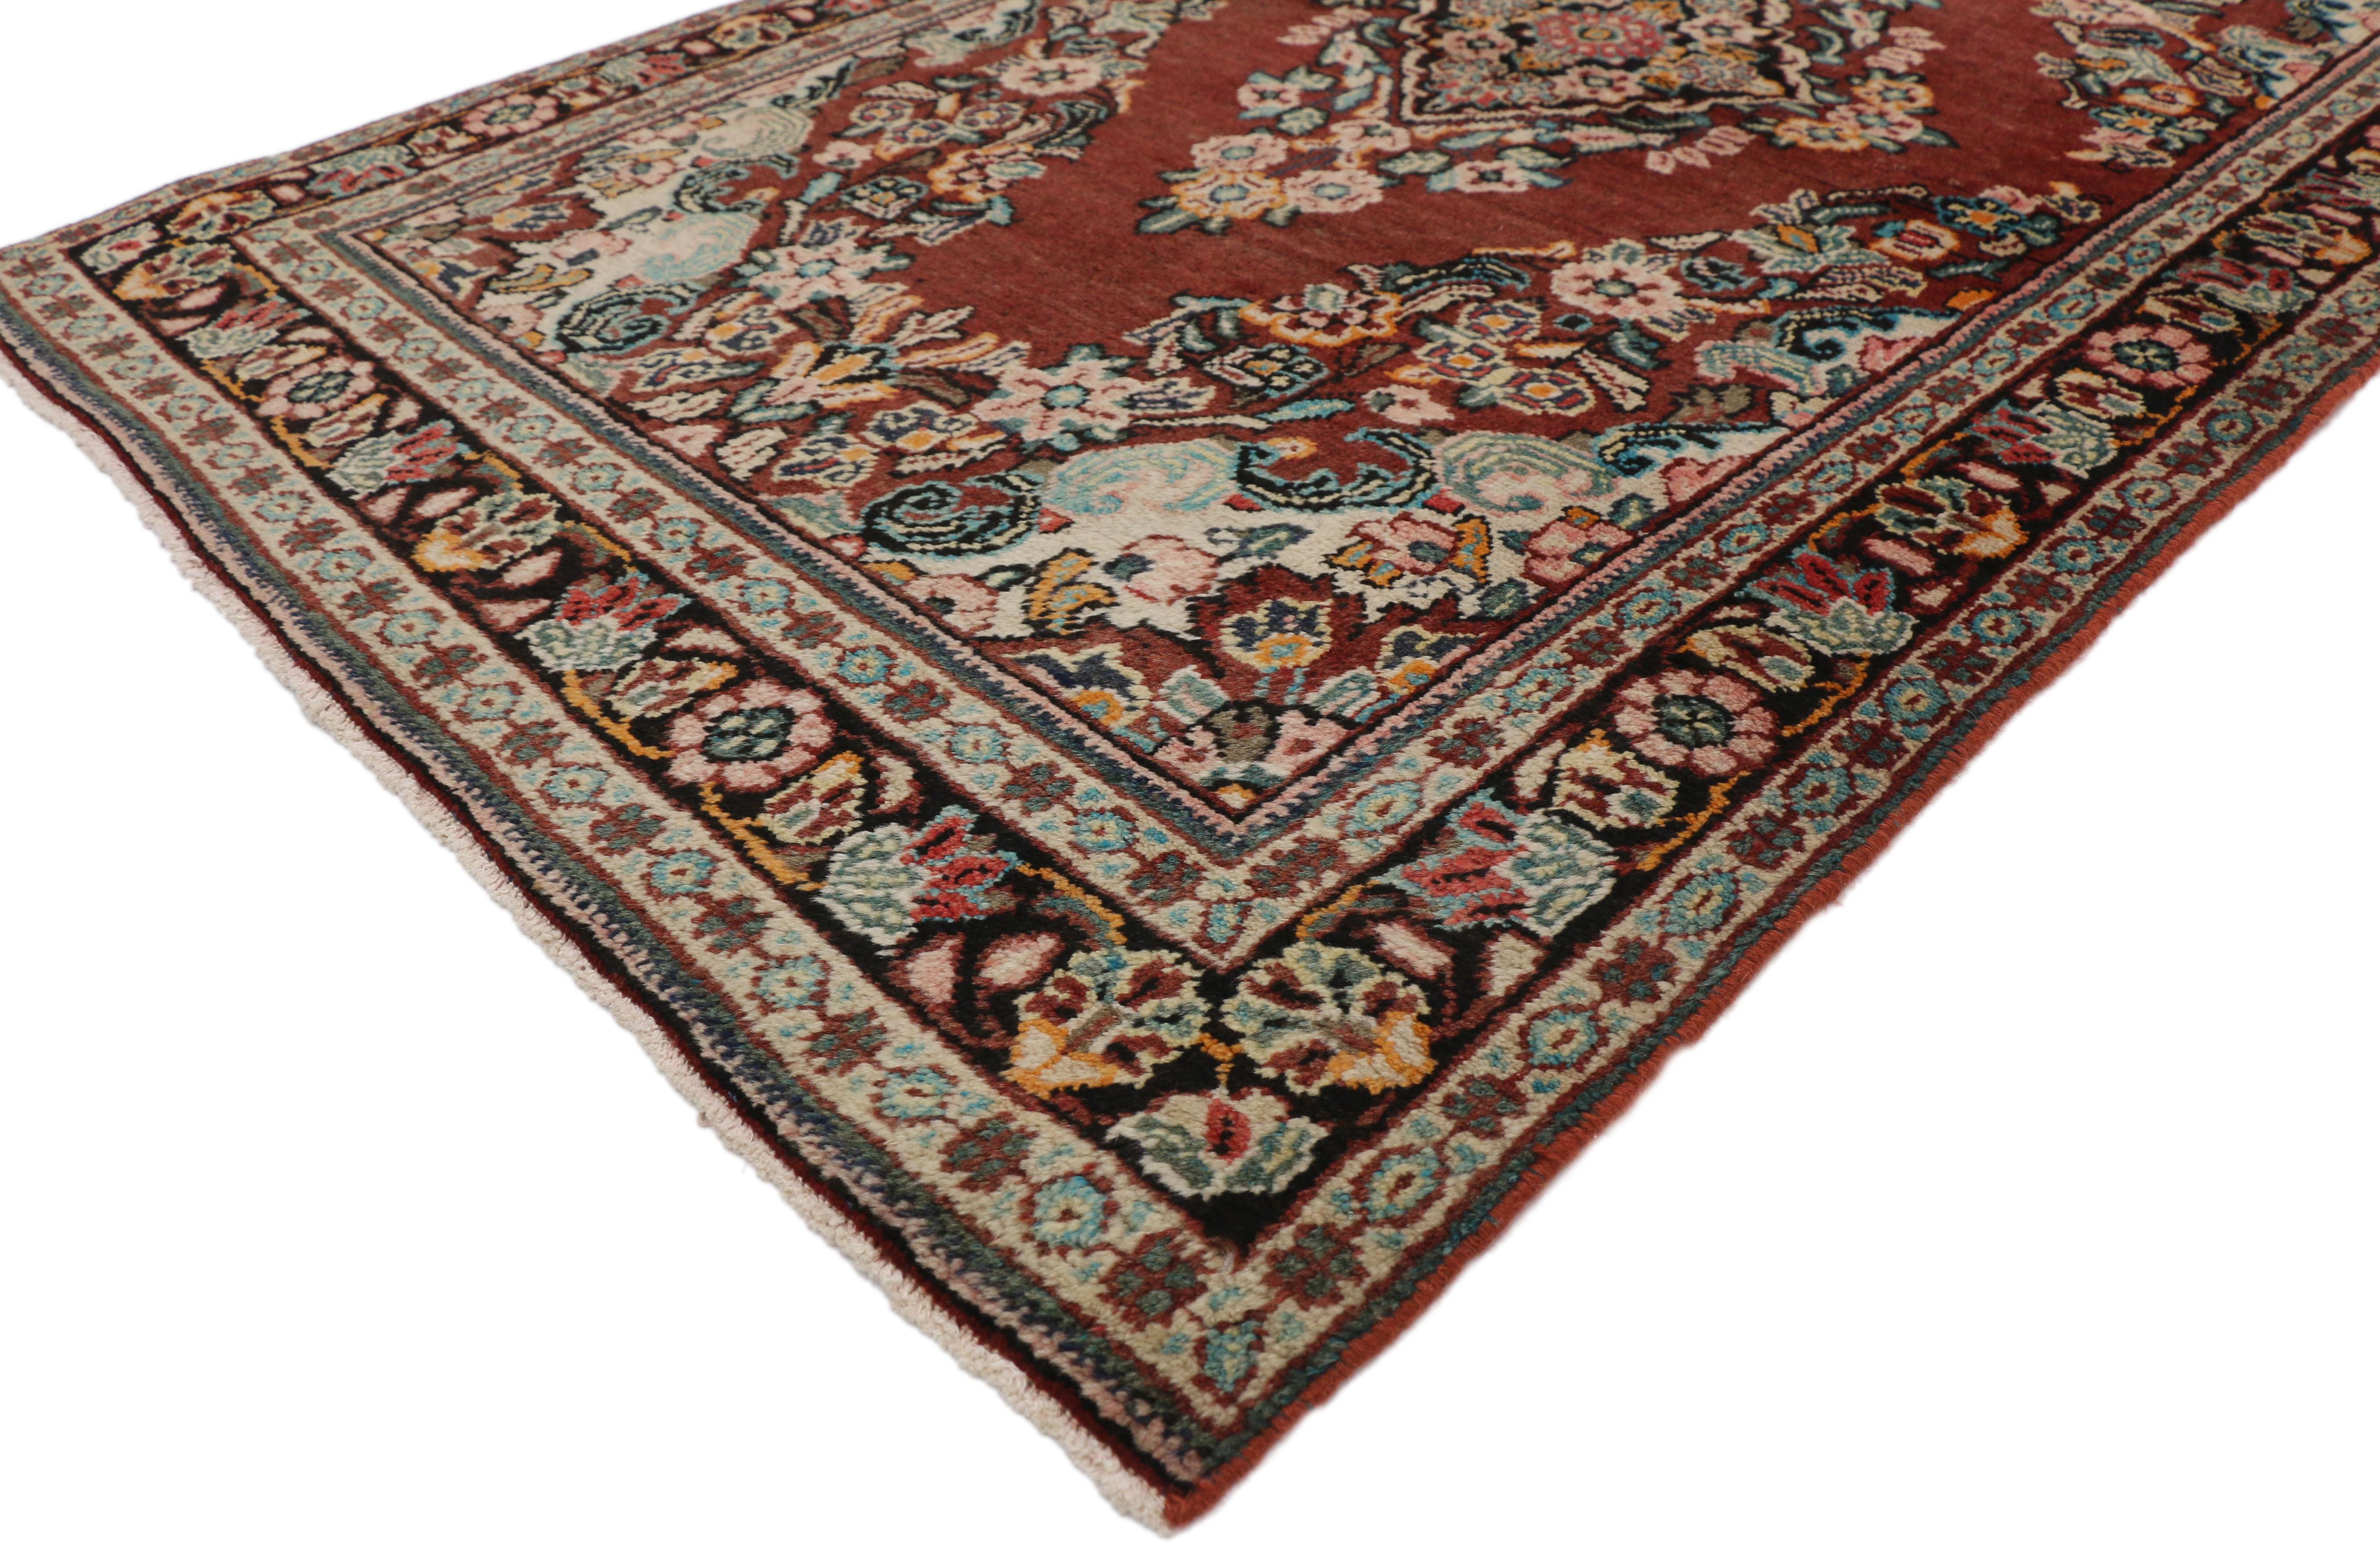 75979 vintage Persian Mahal rug with Rustic English Country style. Boasting a floral bounty in a range of warm hues, this hand knotted wool vintage Persian Mahal rug is a delightful example of rustic English Country style. At the center of the